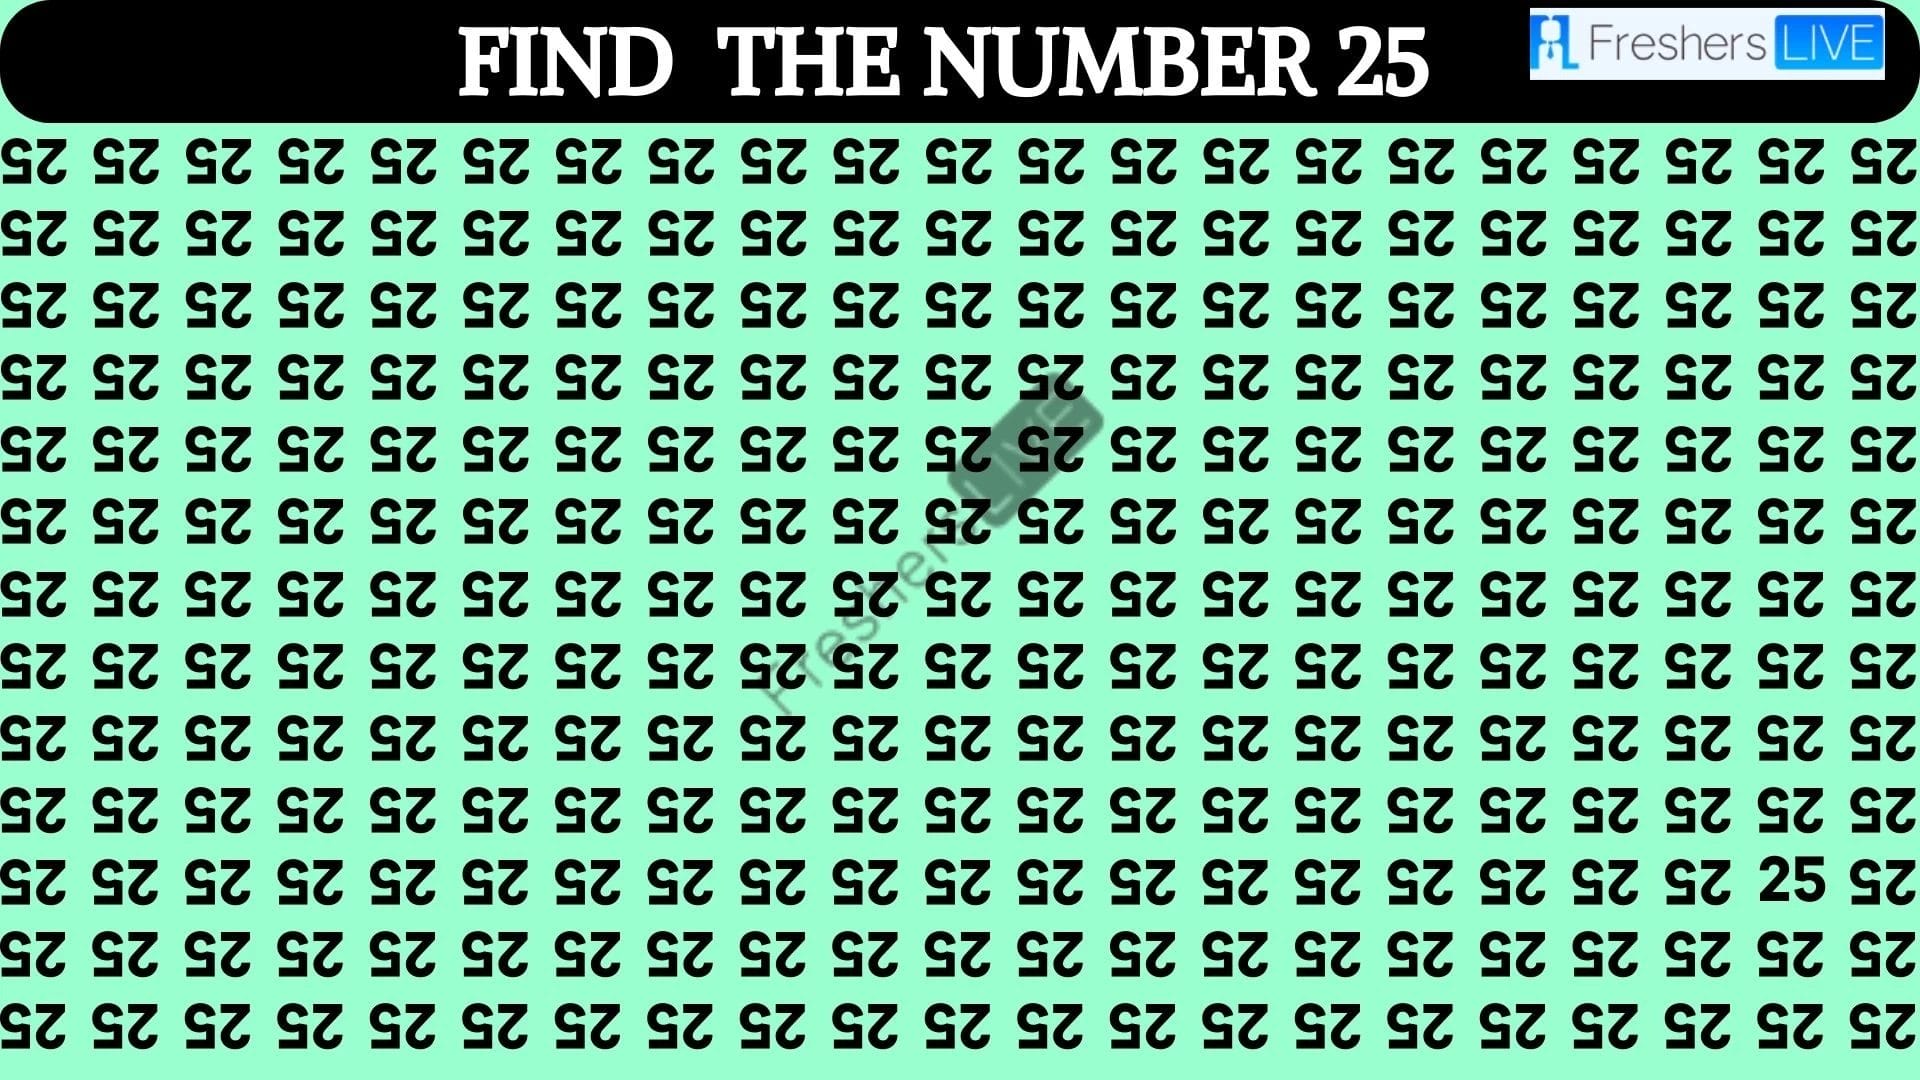 Only 50/50 HD Vision People can Find the the Number 25 in 12 Secs